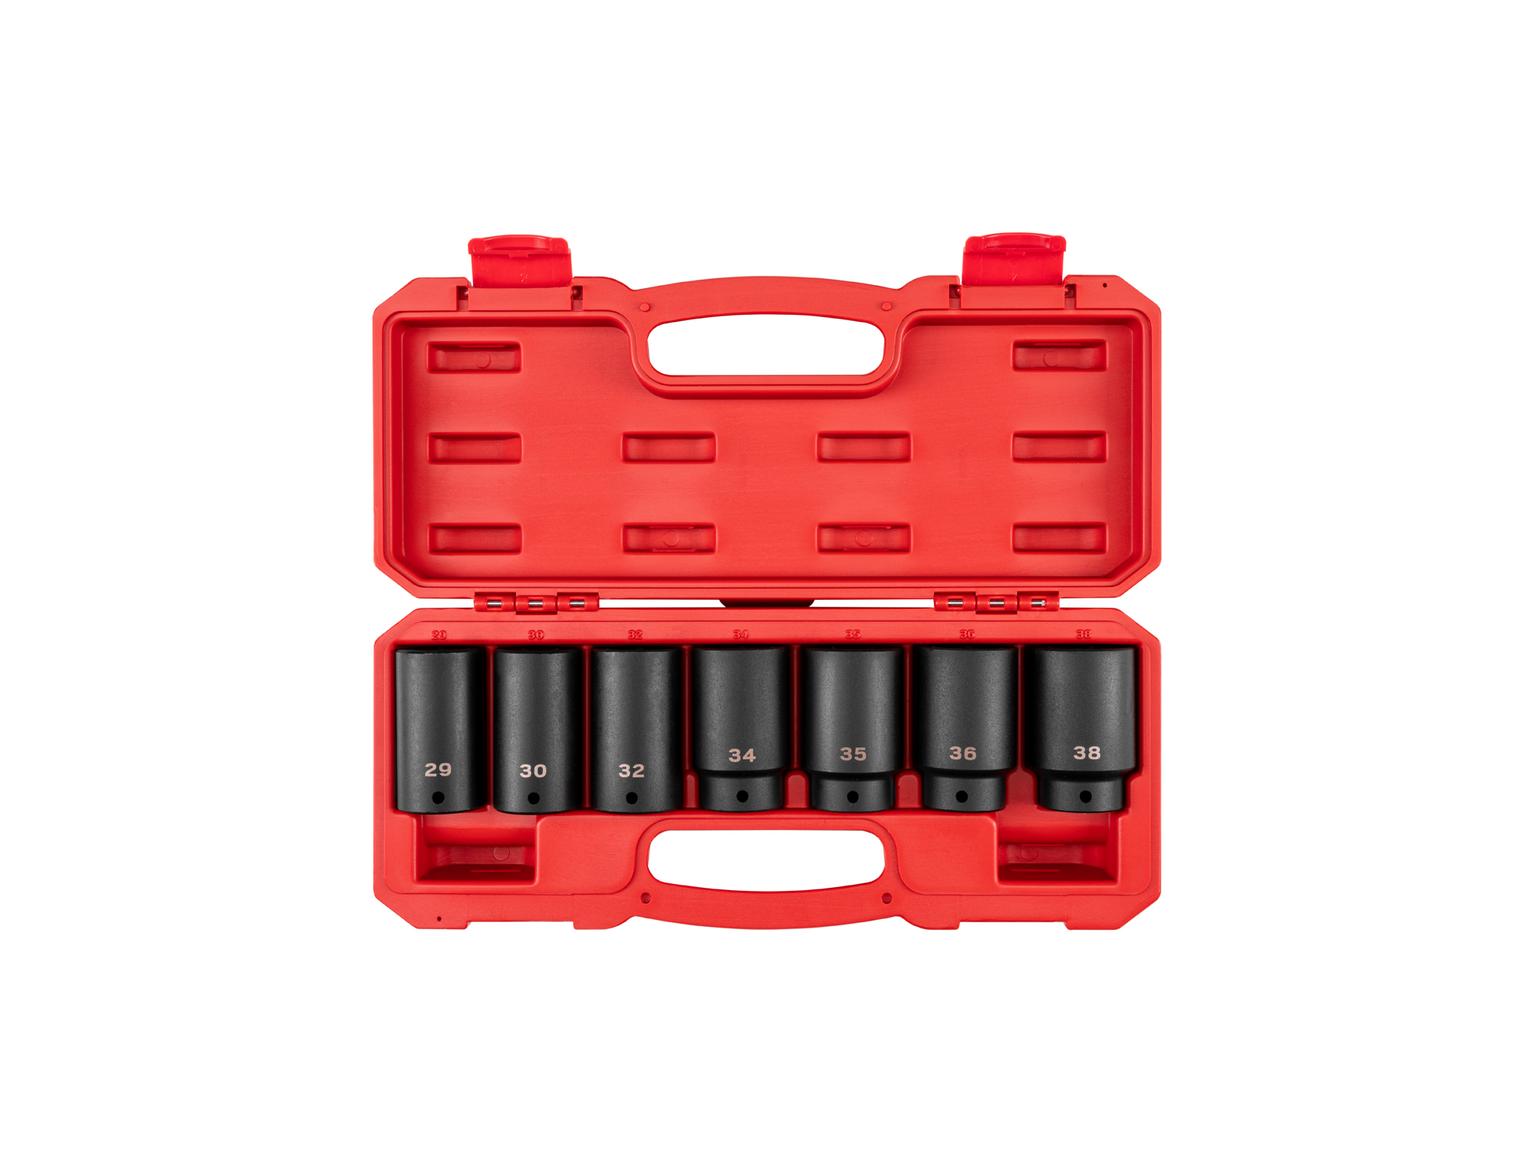 TEKTON SID92340-D 1/2 Inch Drive Deep 6-Point Axle Nut Impact Socket Set with Case, 7-Piece (29-38 mm)